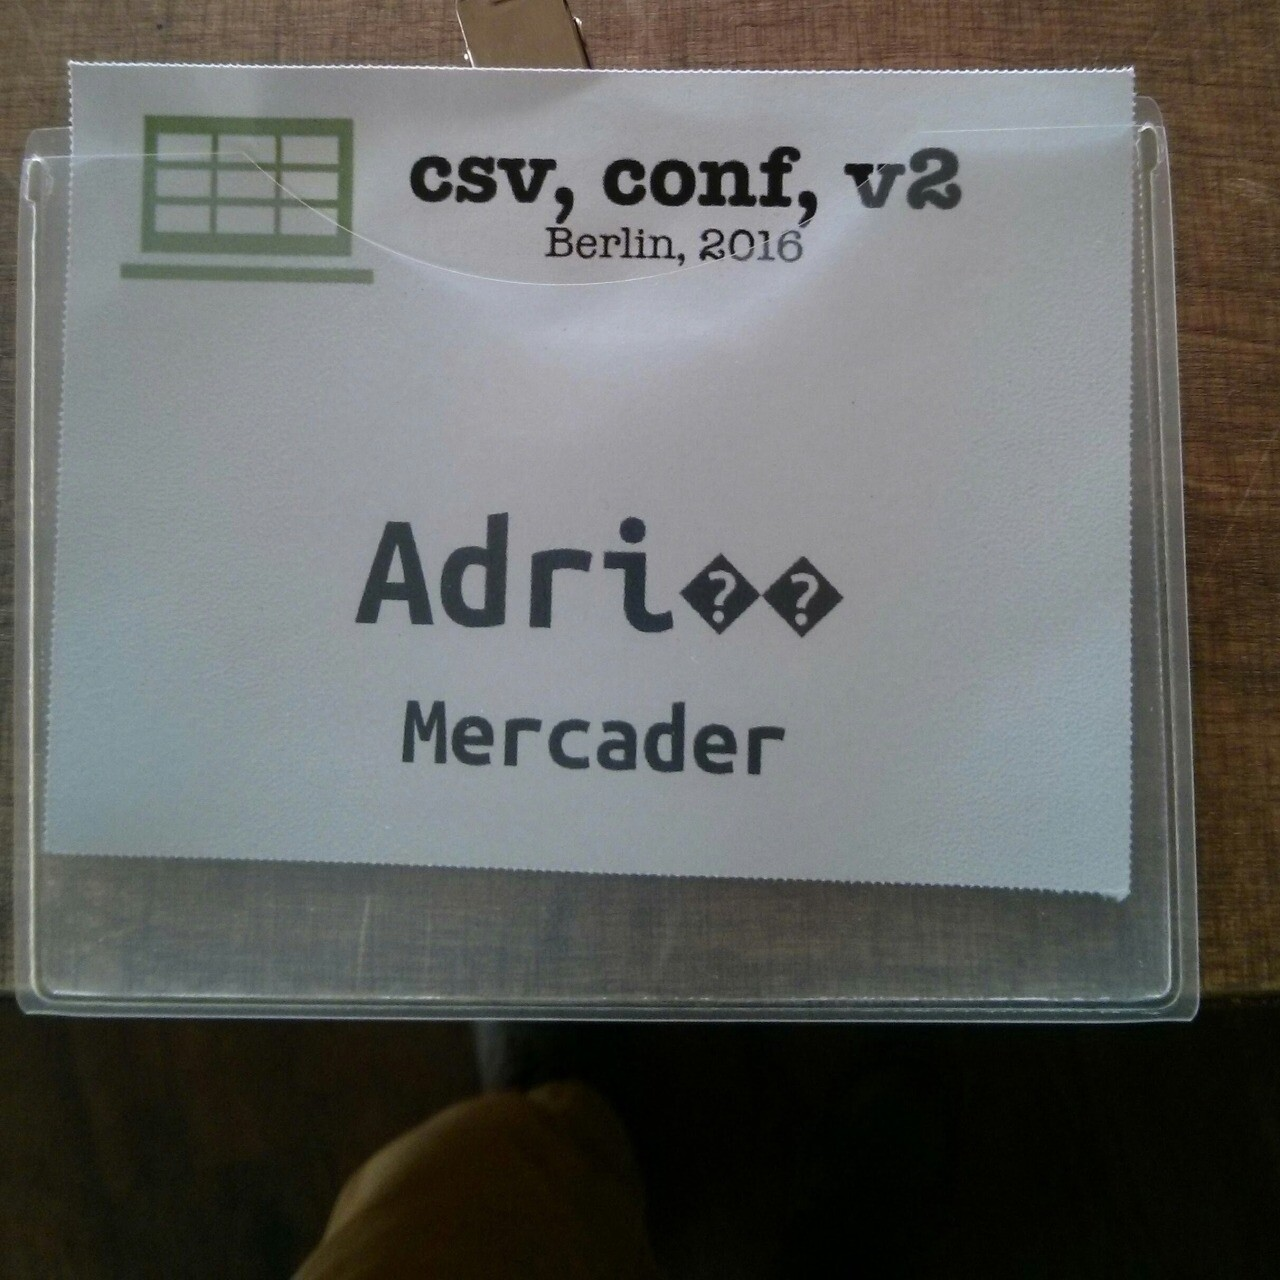 A conference badge of csv, conf 2016 for Adrià Mercader with first name written as “Adri” followed by two question marks in black triangles. 